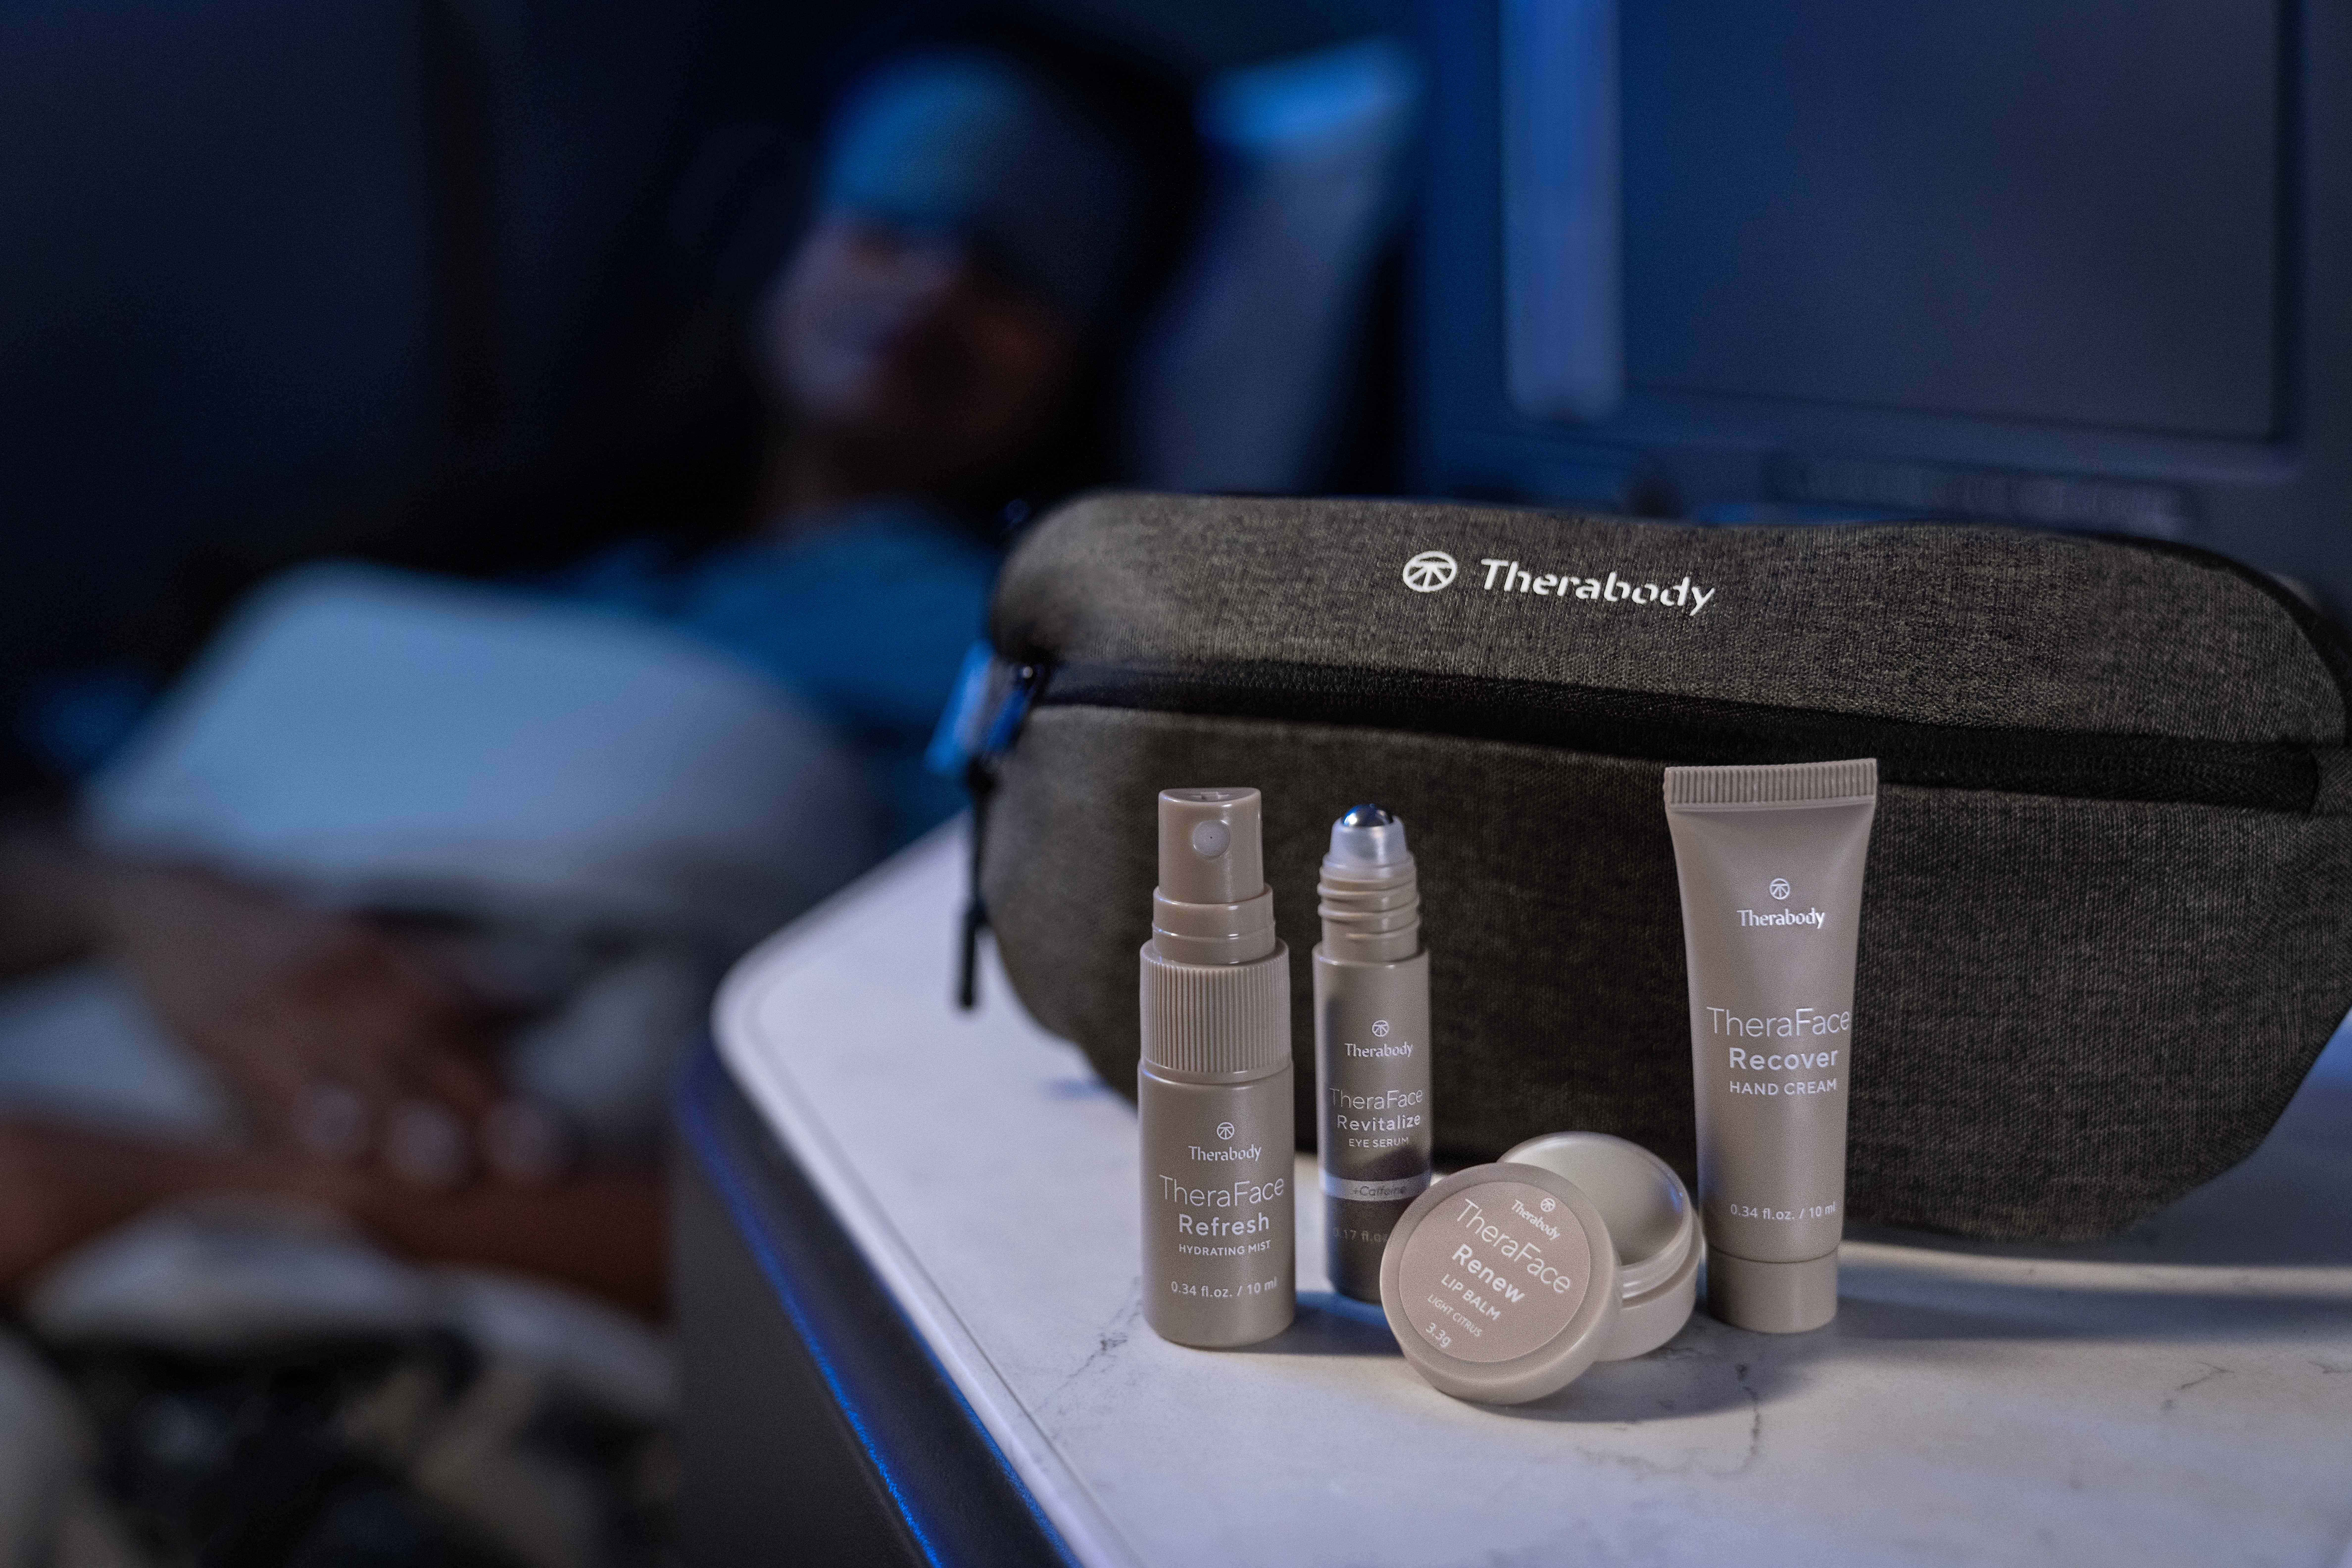 United Launches New Polaris Amenities From Saks Fifth Avenue and Therabody